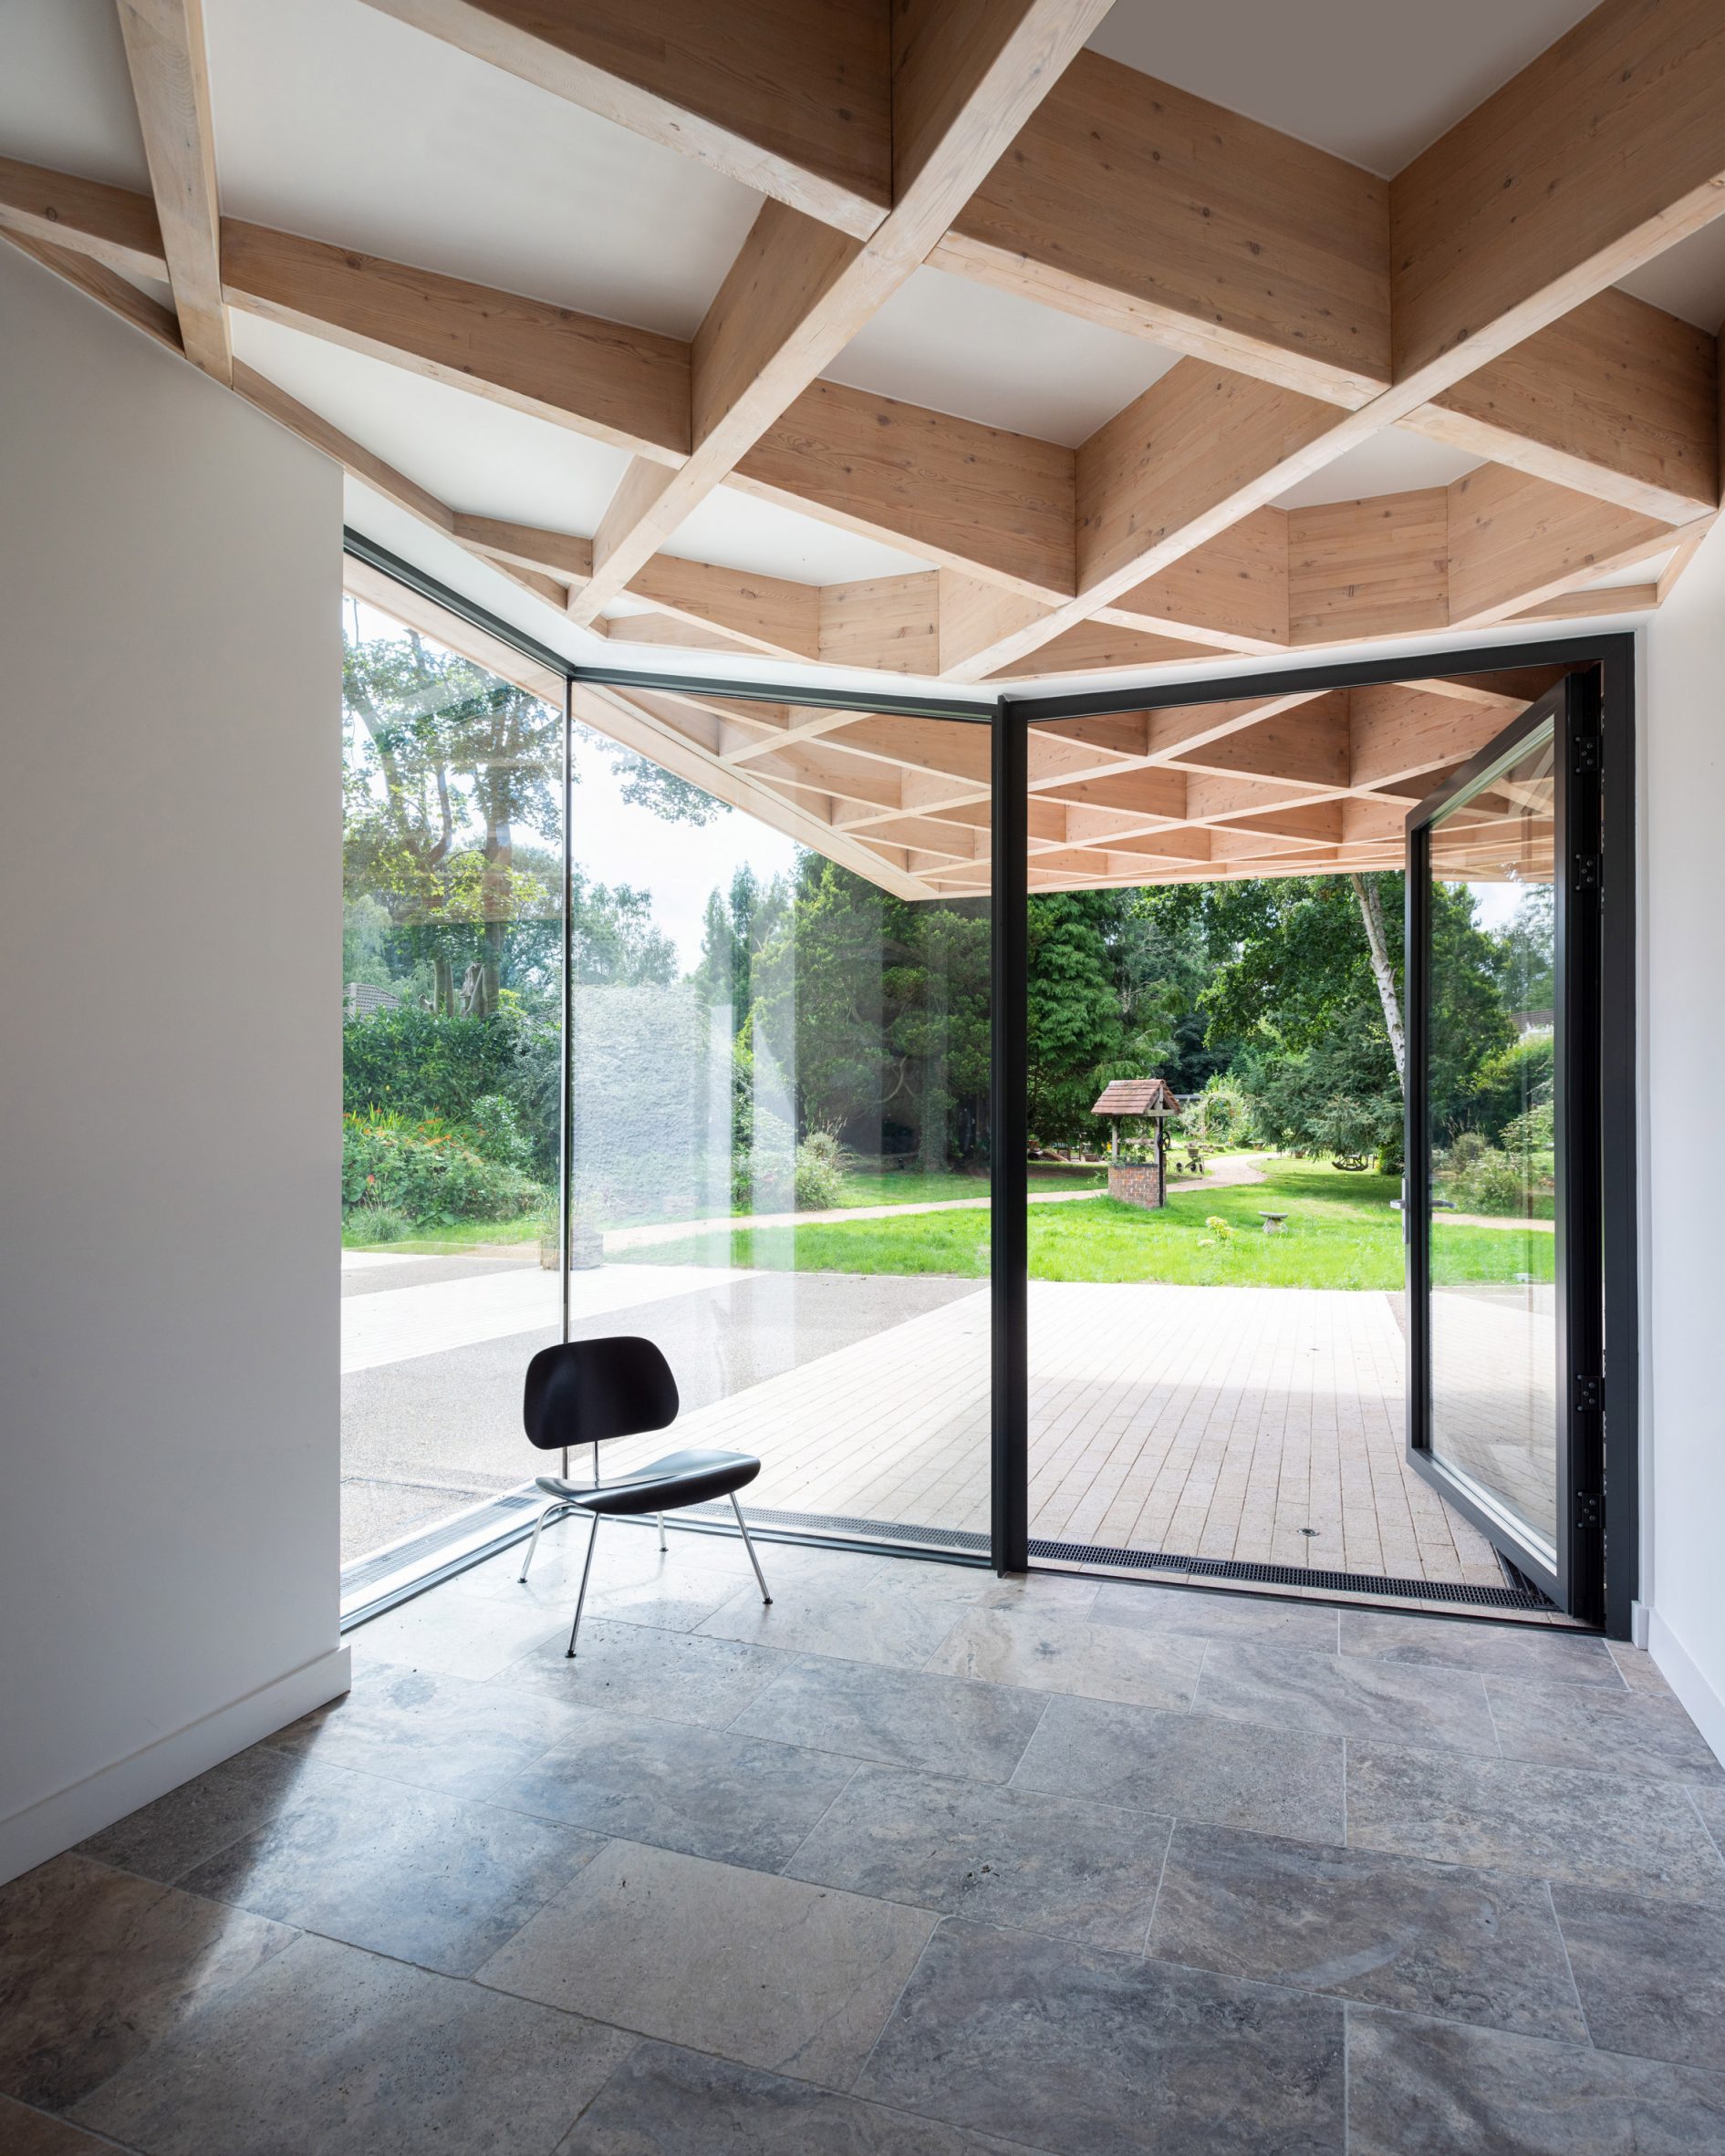 Timber diagrid roof in House for Theo and Oskar by Tigg + Coll